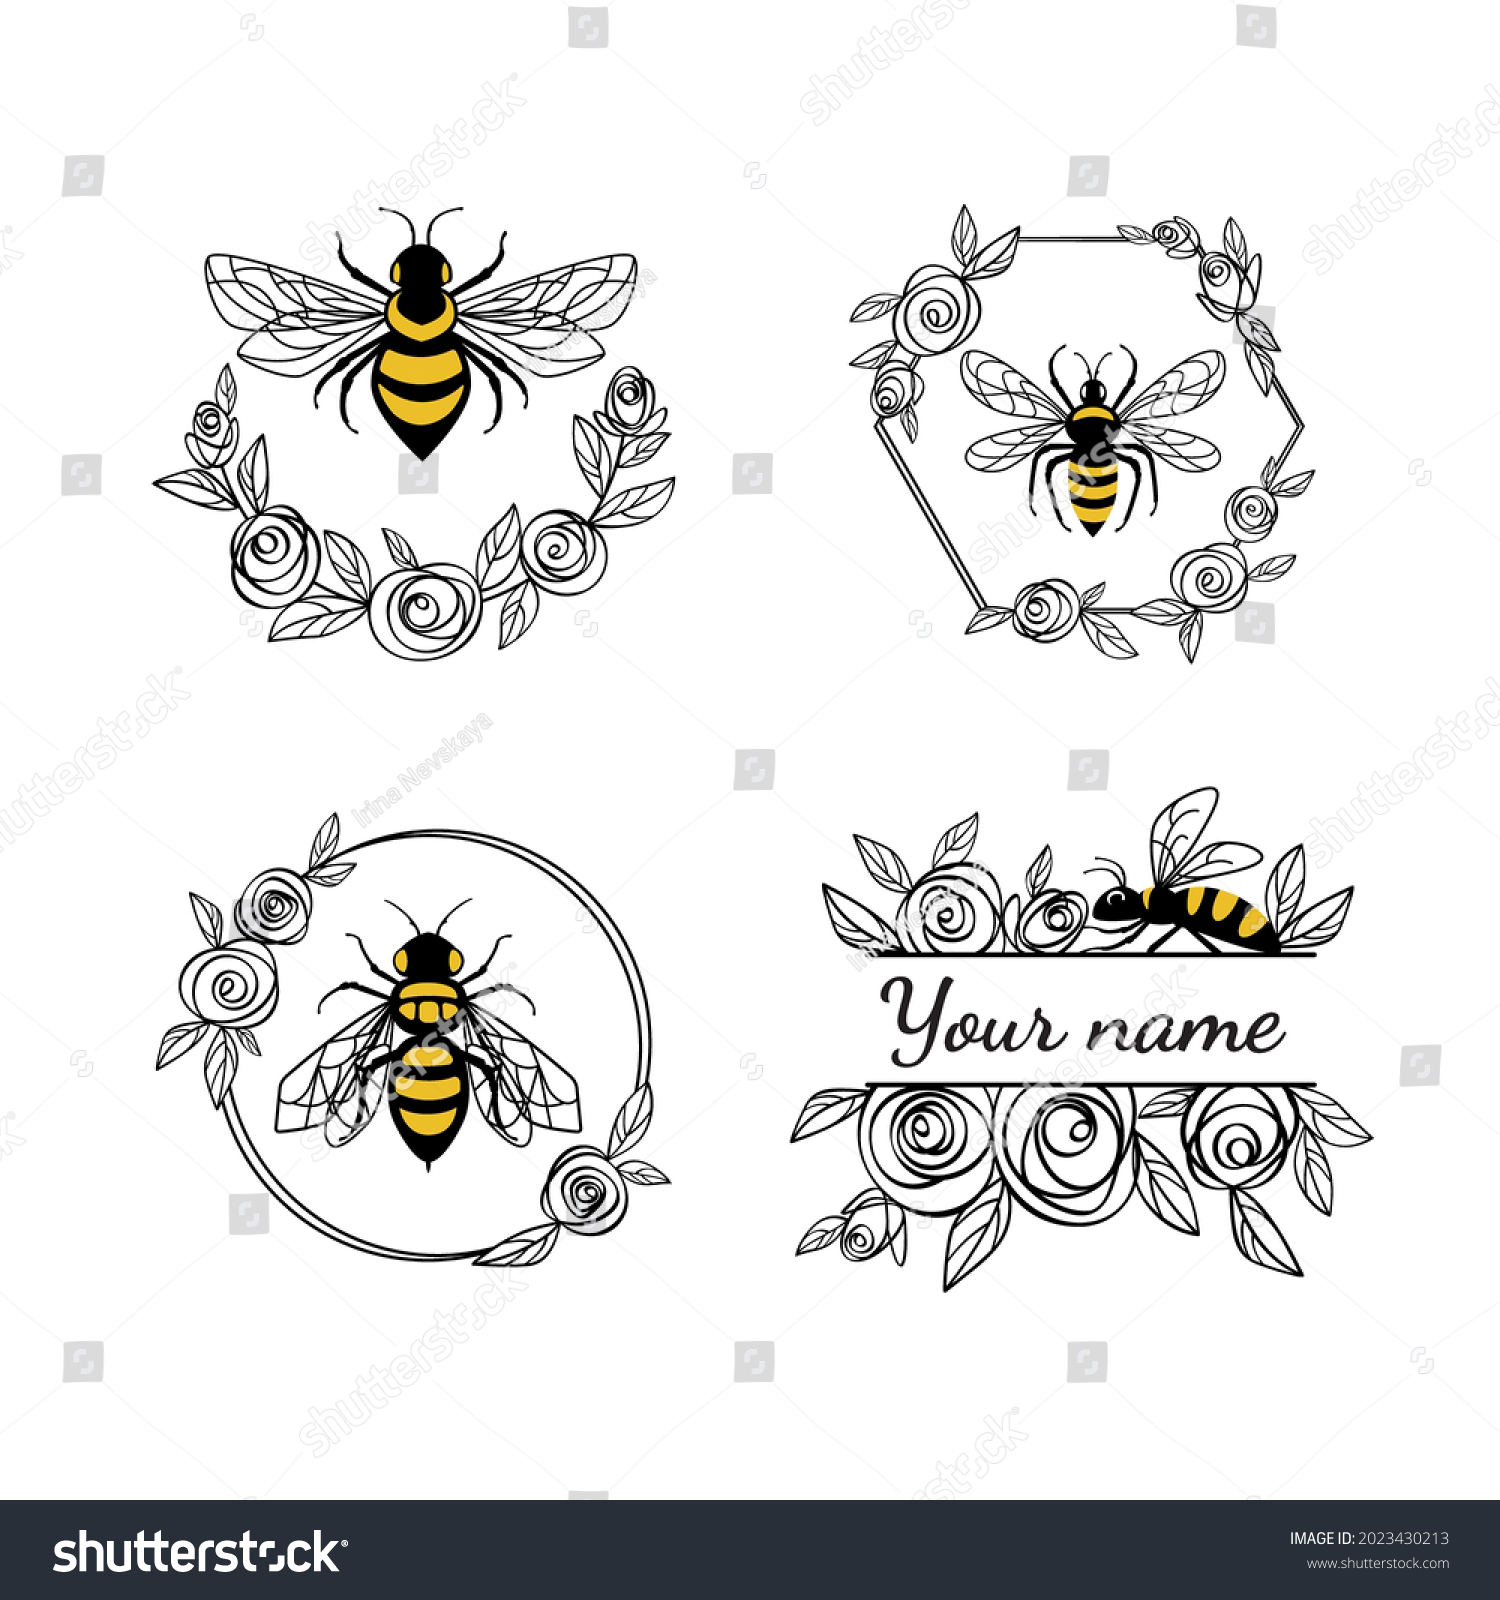 SVG of Honey bee in a flower frame. Set of floral frames and wreaths. Made of rose flowers and leaves. Suitable for cutting SVG files on a plotter. Bumblebee for t-shirt design svg